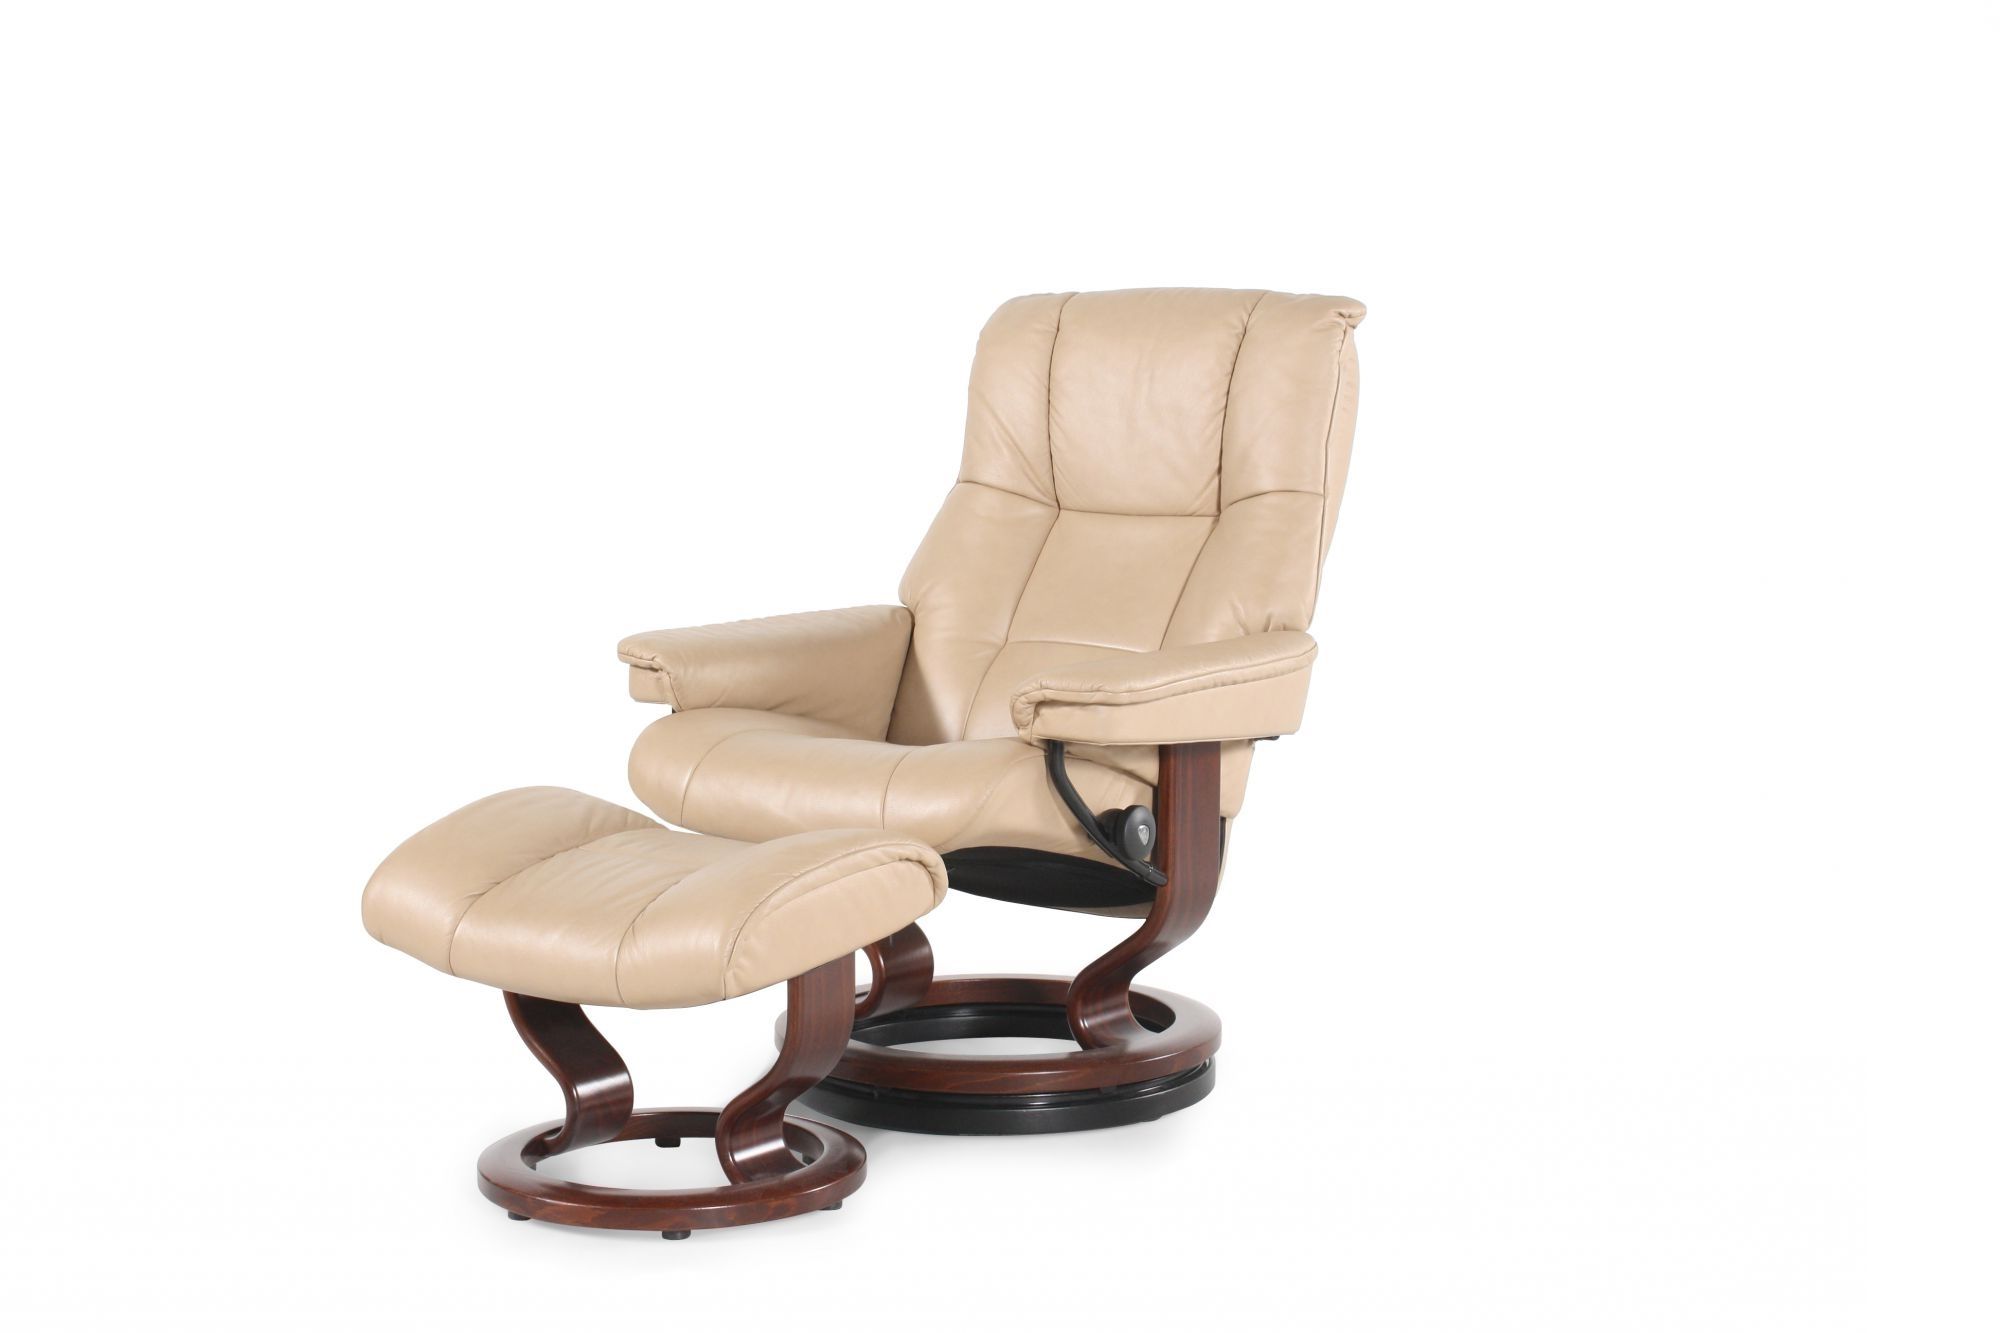 Mathis Brothers Chaise Lounge Chairs Regarding Fashionable Ekornes Mayfair Paloma Sand Chair And Ottoman (View 1 of 15)